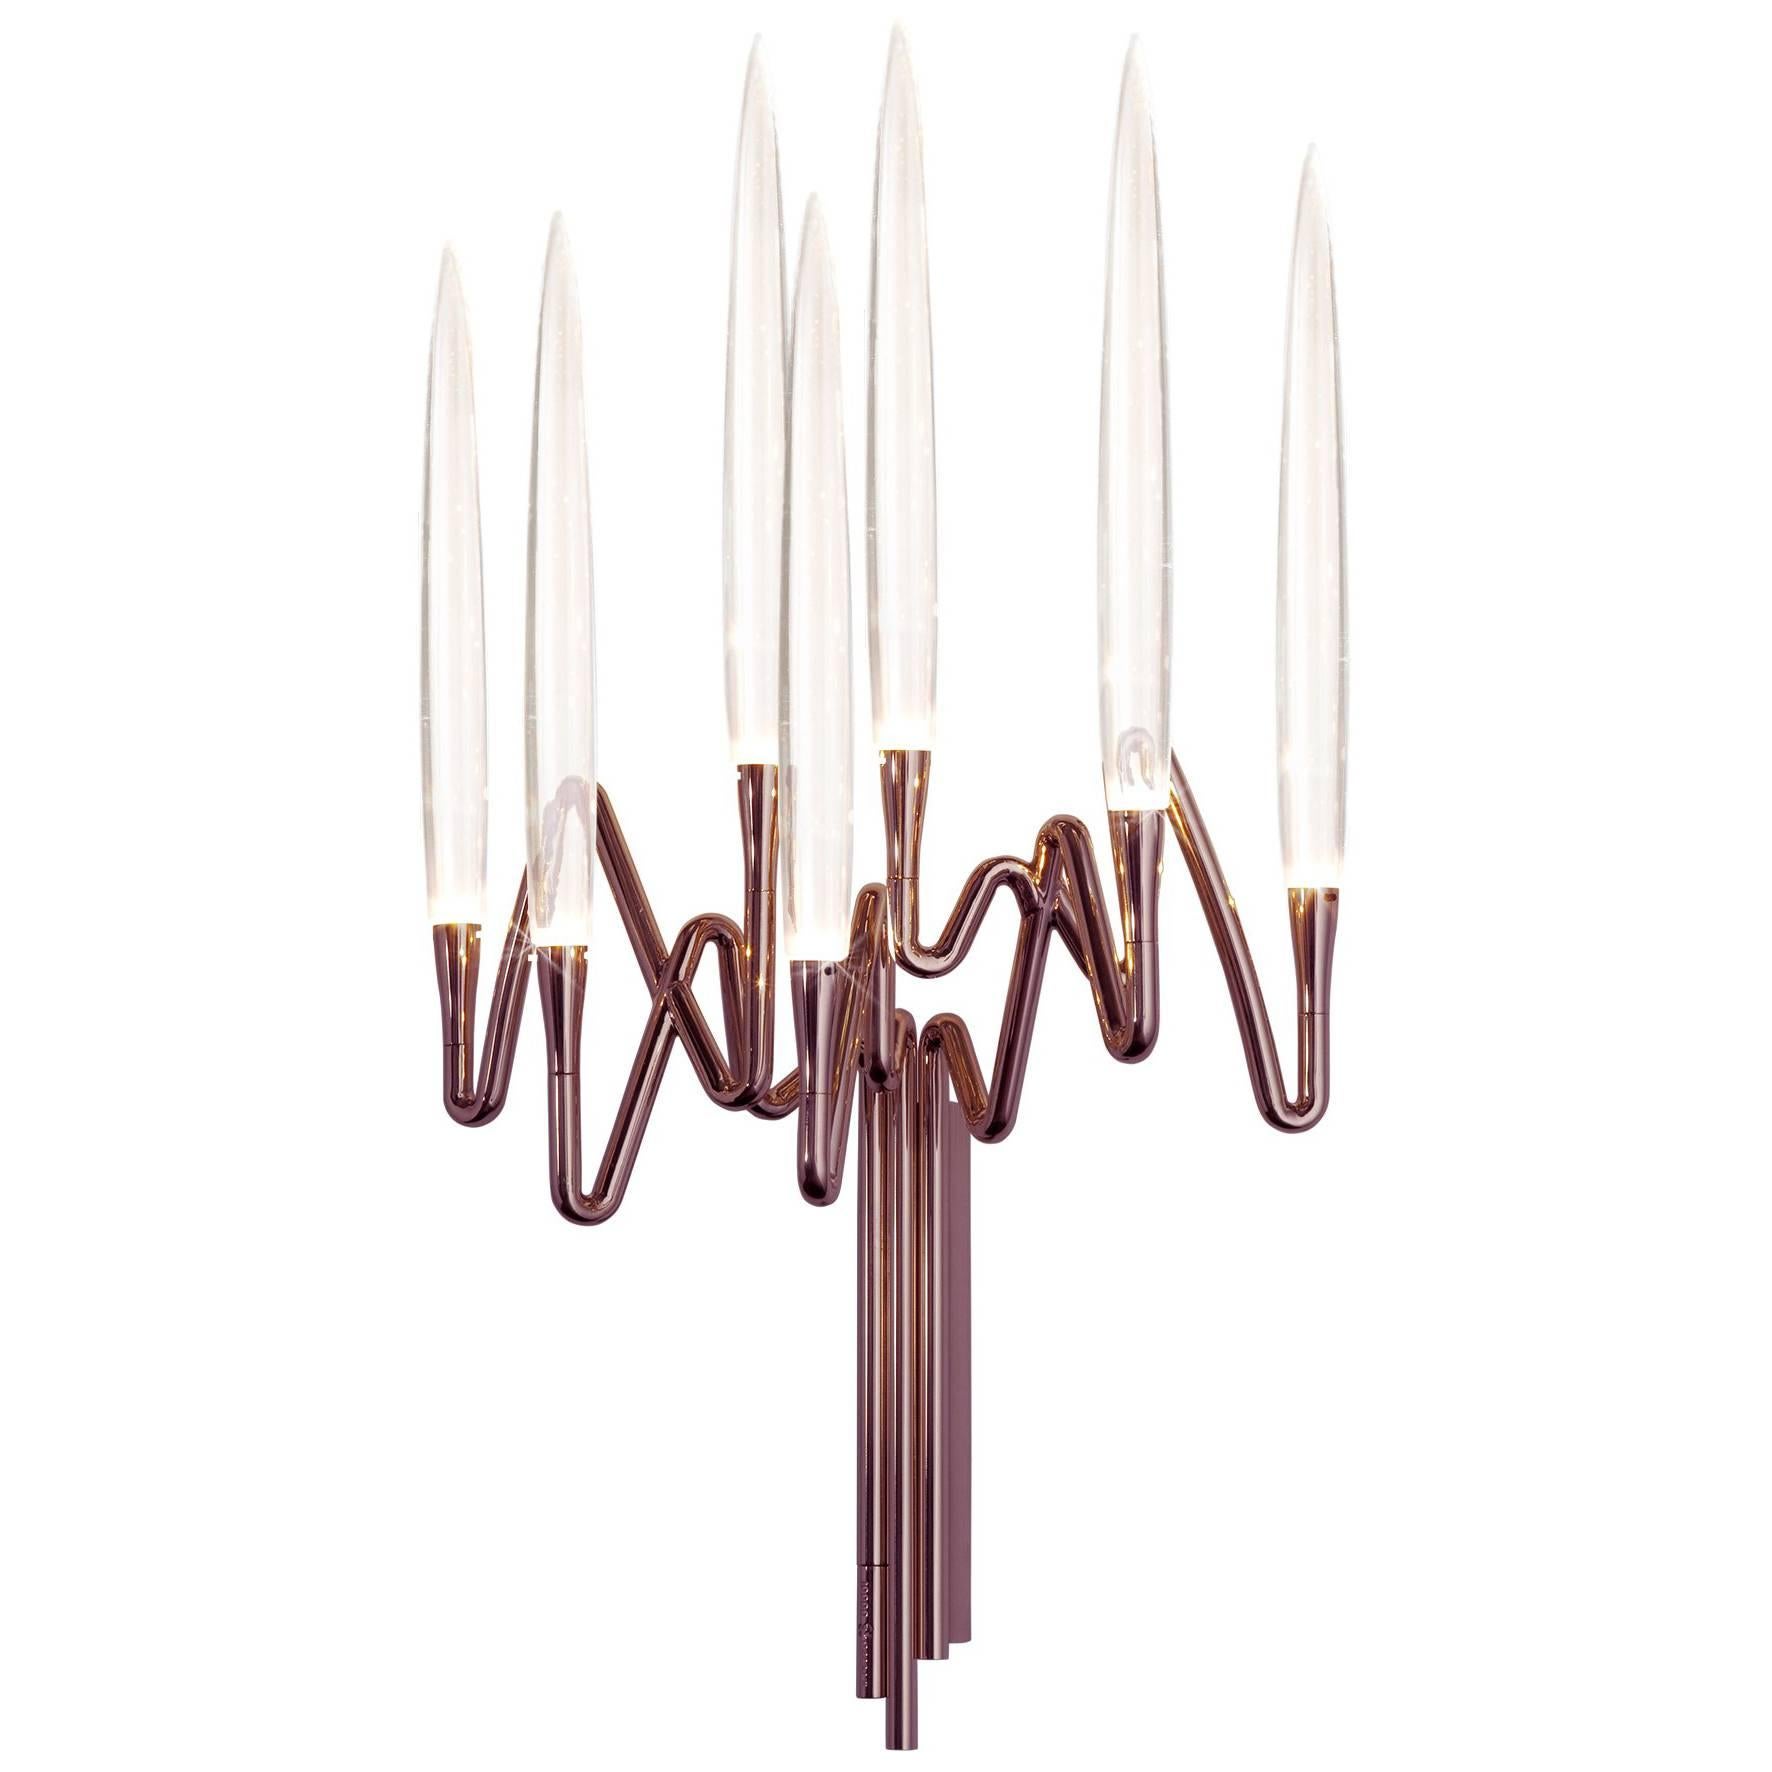 "Il Pezzo 3 Wall Sconce" rose bronze finish candelabrum wall light